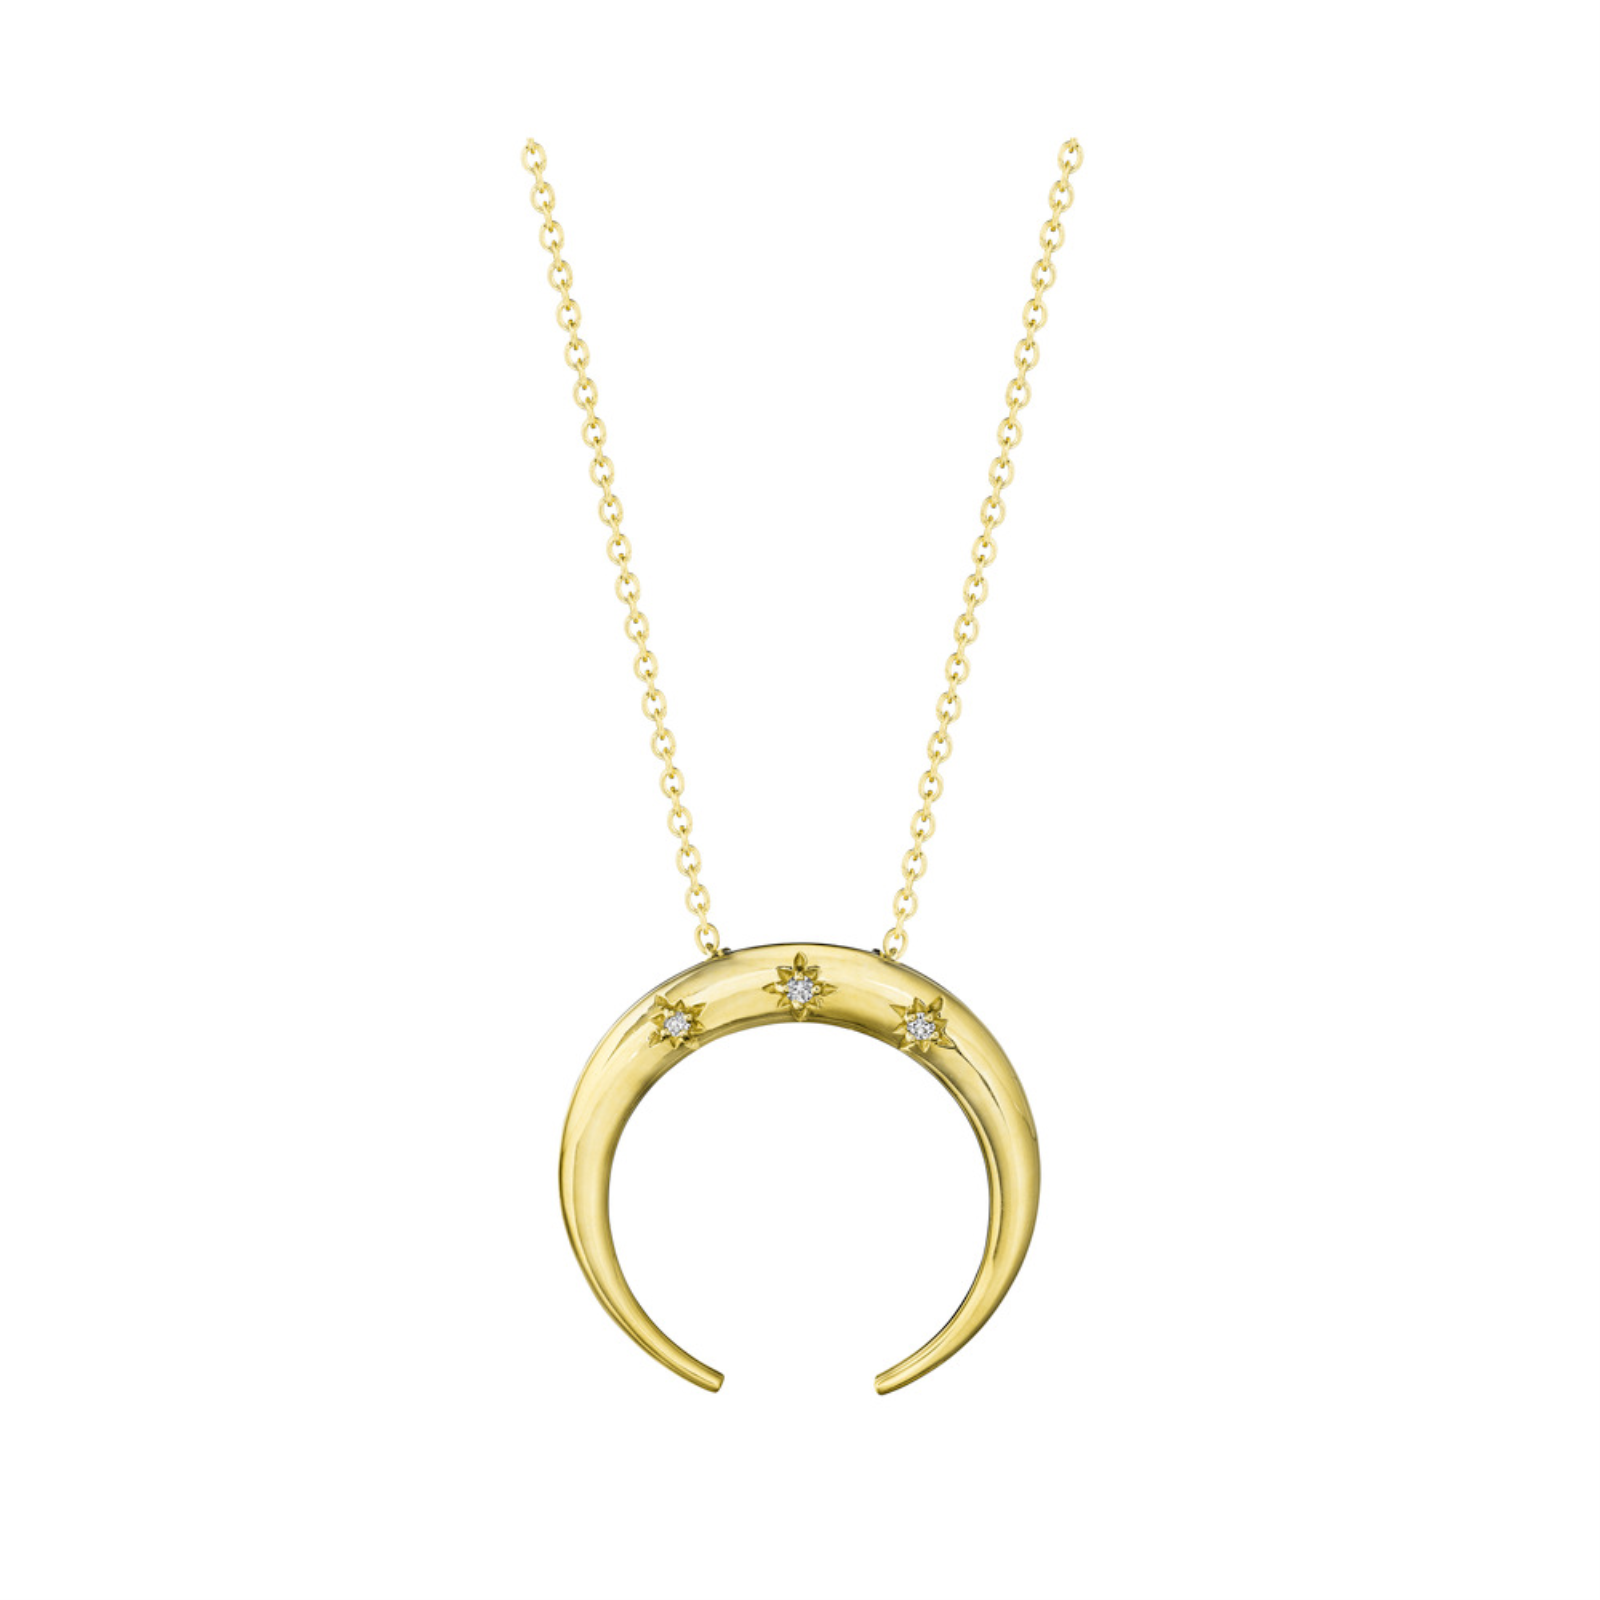 Gold and Diamond Crescent Moon Necklace